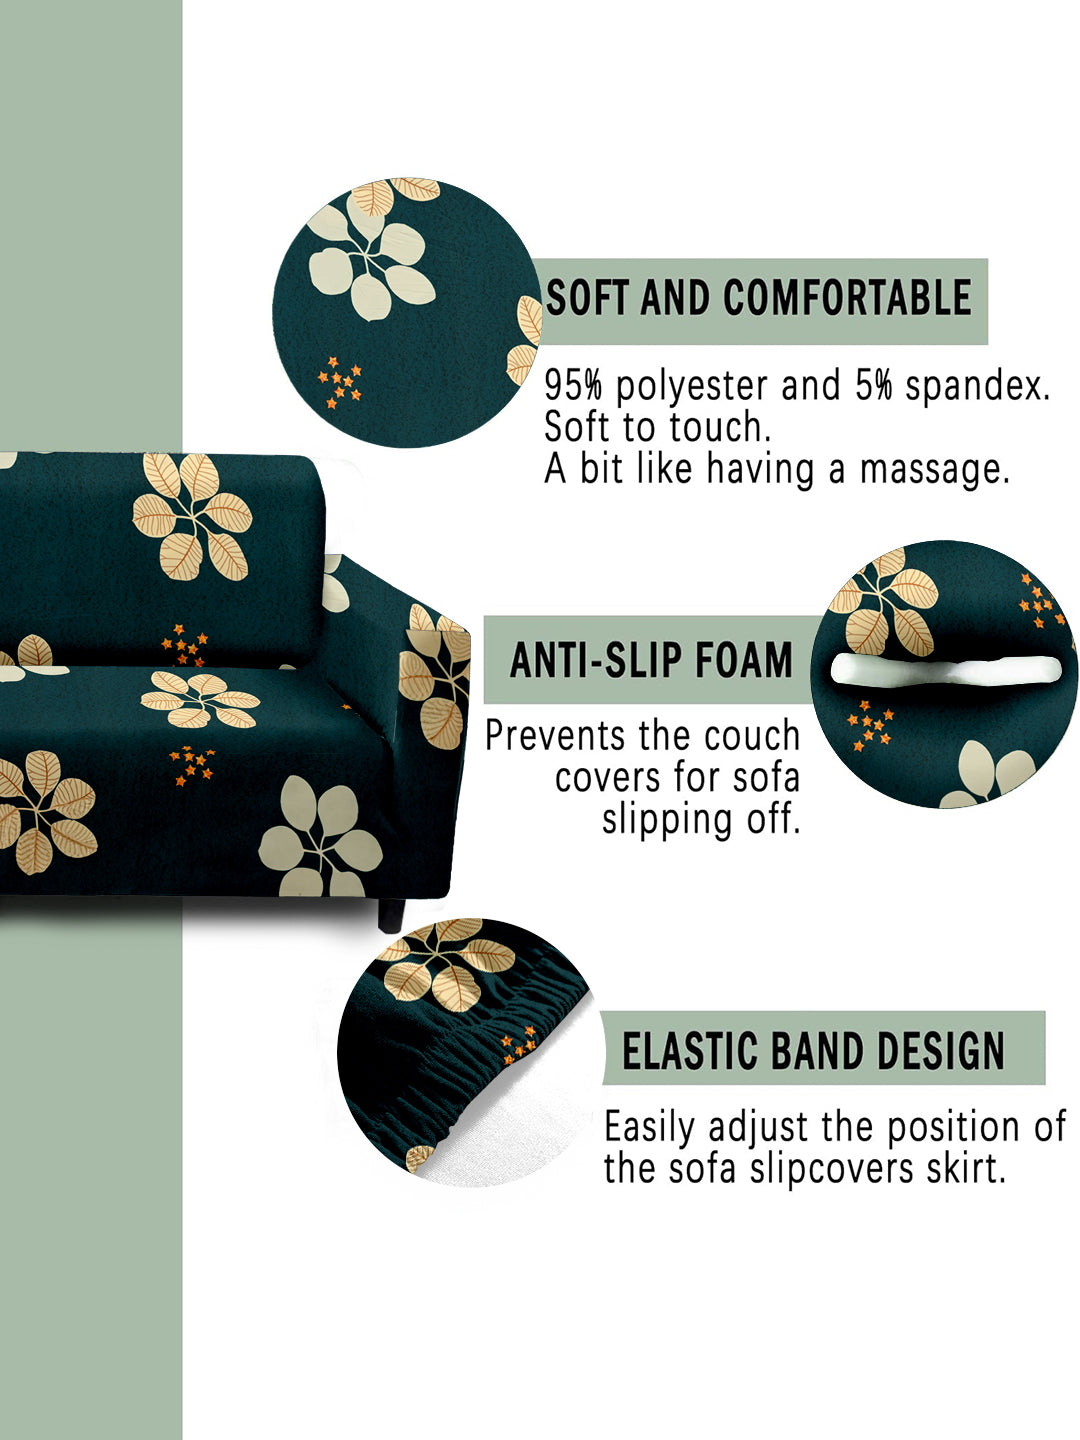 Elastic Stretchable Universal Printed Sofa Cover 3+1+1 Seater- Green